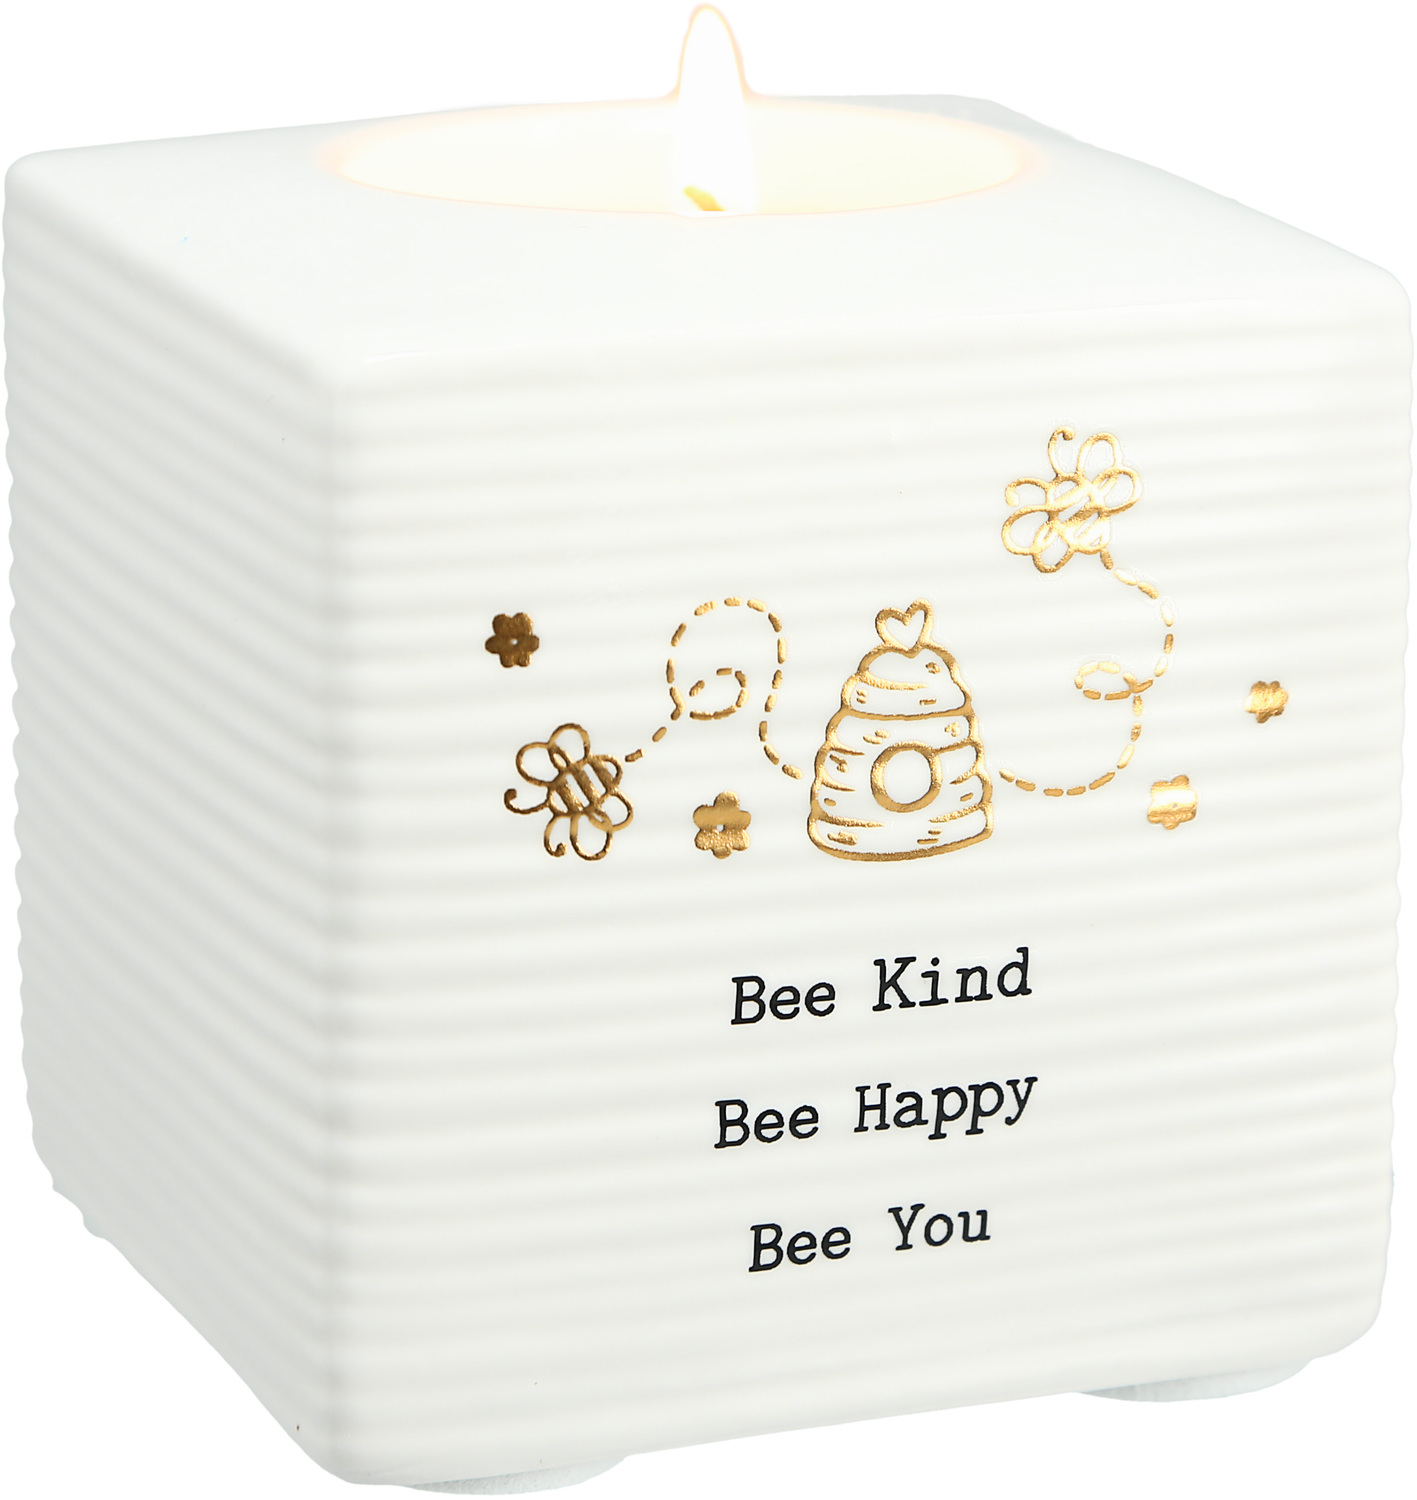 Bee Kind by Thoughtful Words - Bee Kind - 2.75" Tea Light Holder 